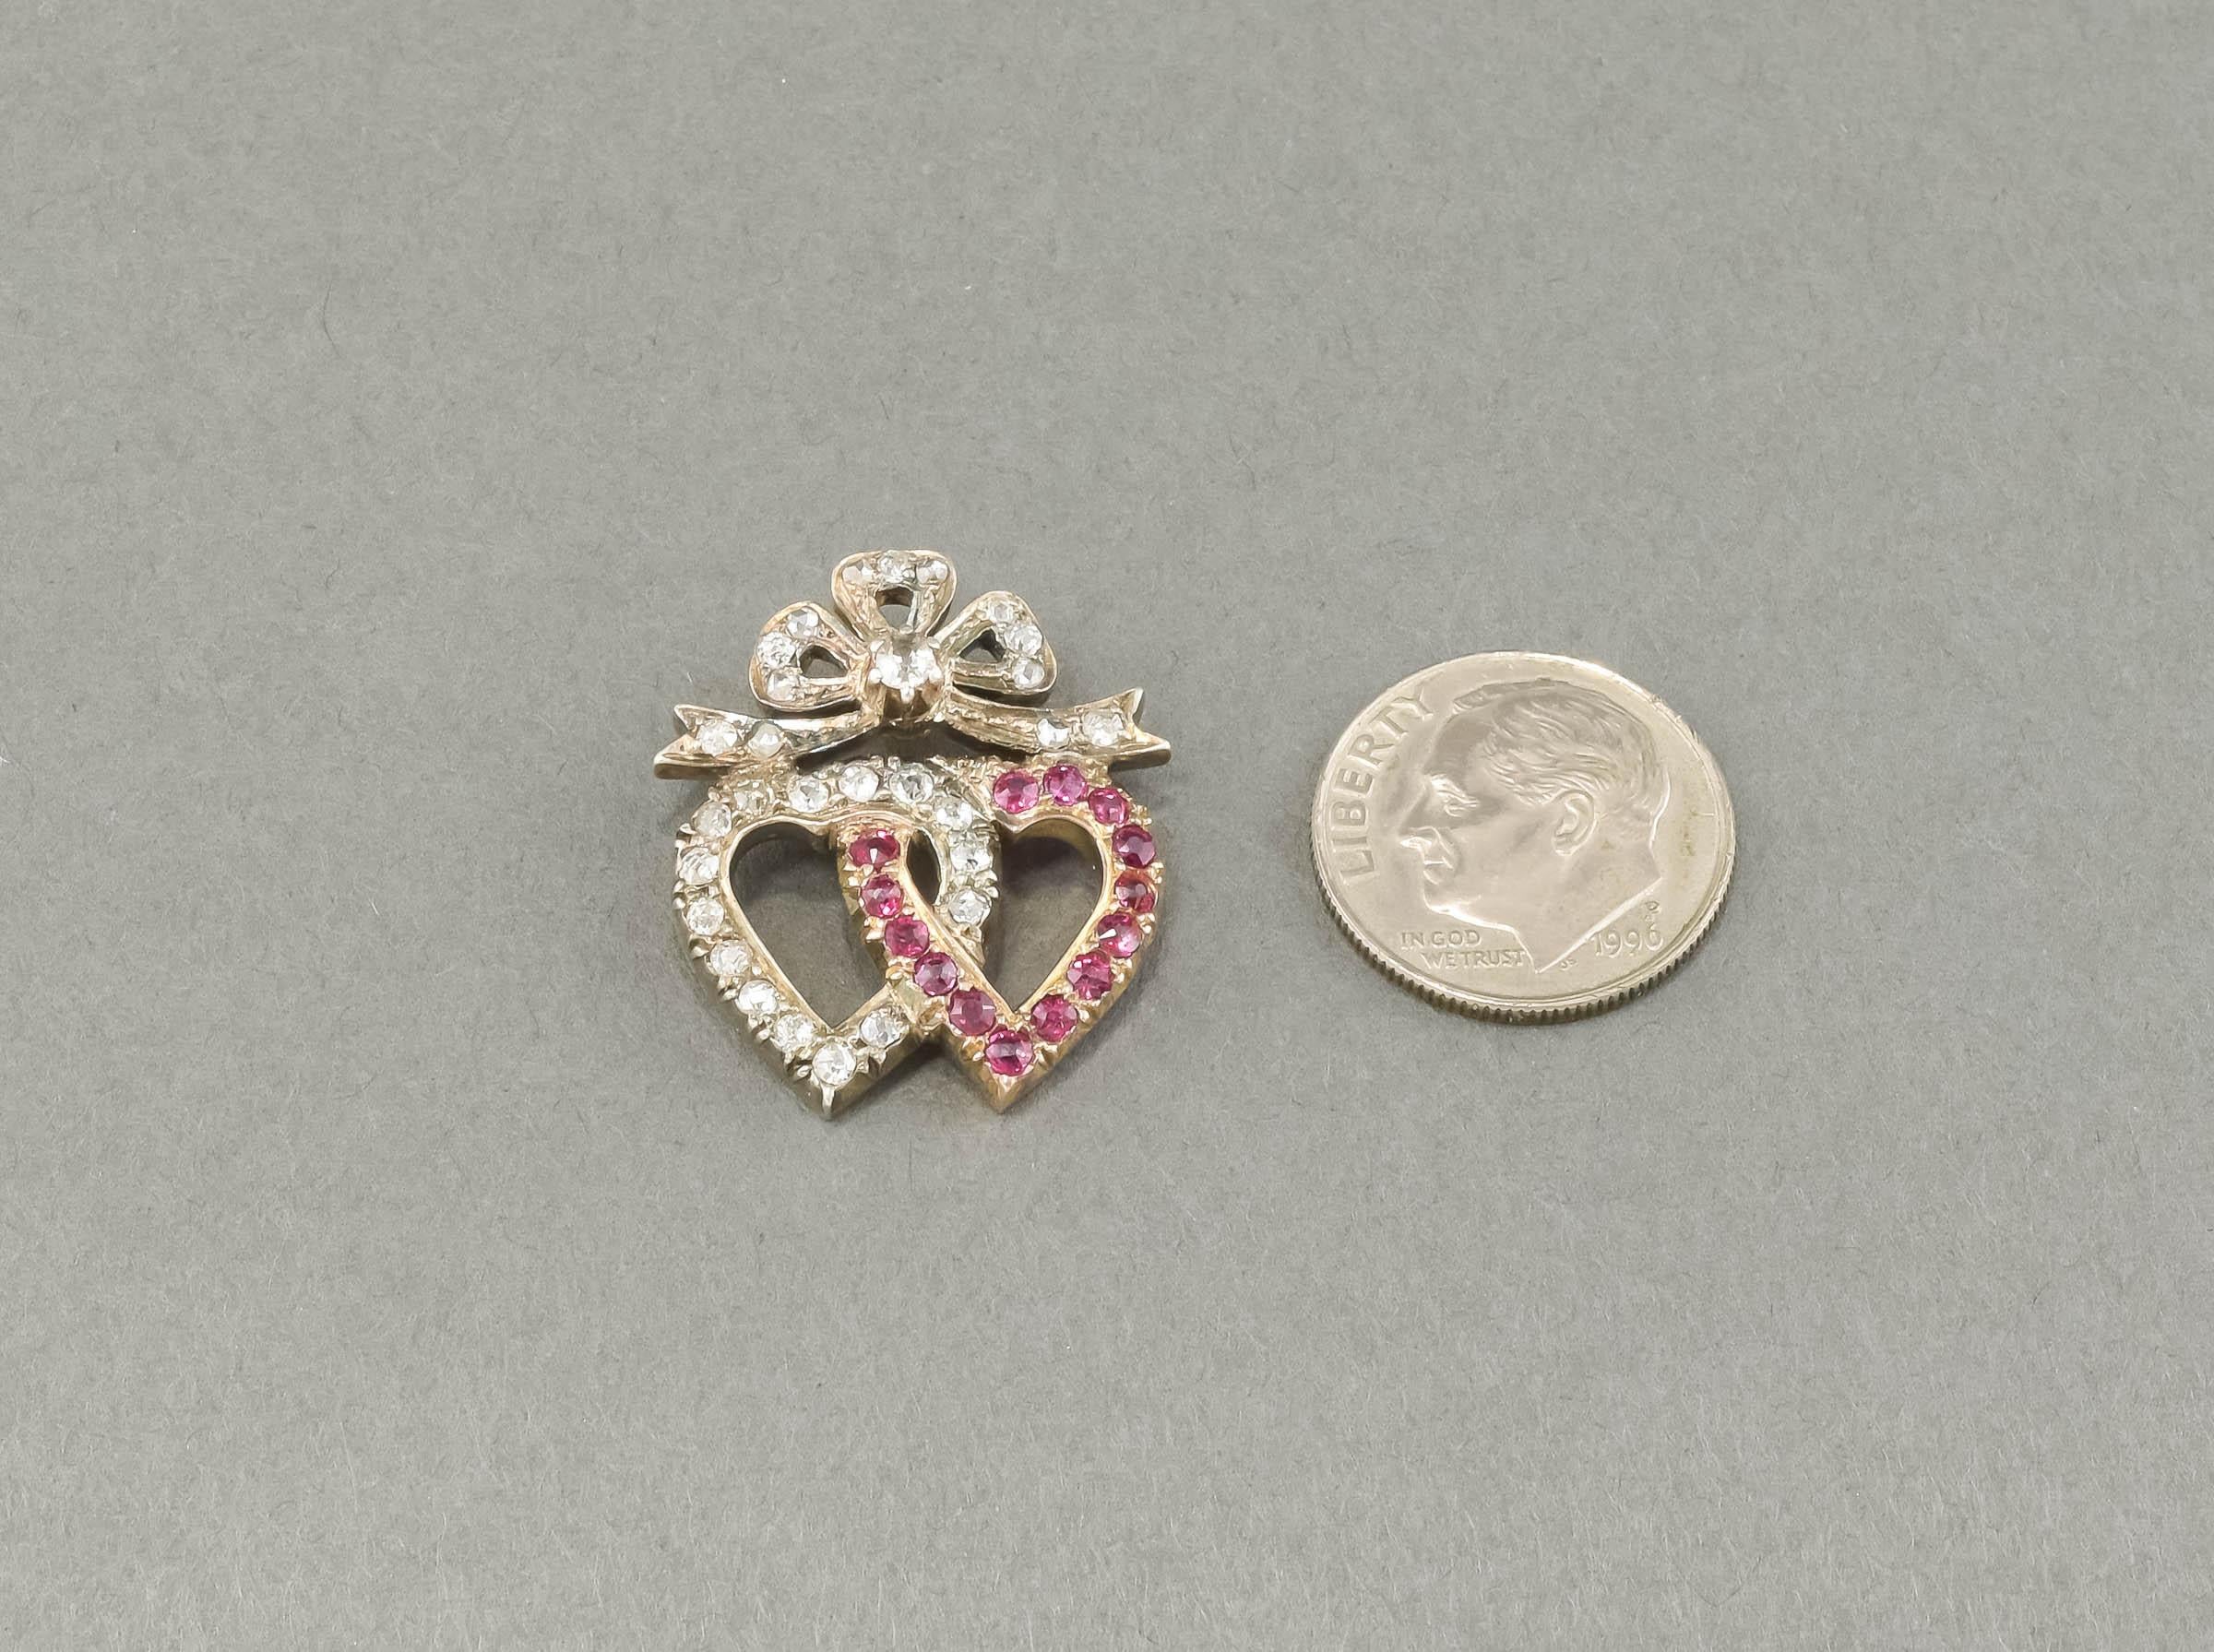 Sparkly and sentimental, this elegant diamond & ruby Double Heart was once part of a late Victorian brooch/pin.  I've converted it to an easy to wear pendant by adding a hidden gold bail on the reverse and removing the old pin stem and